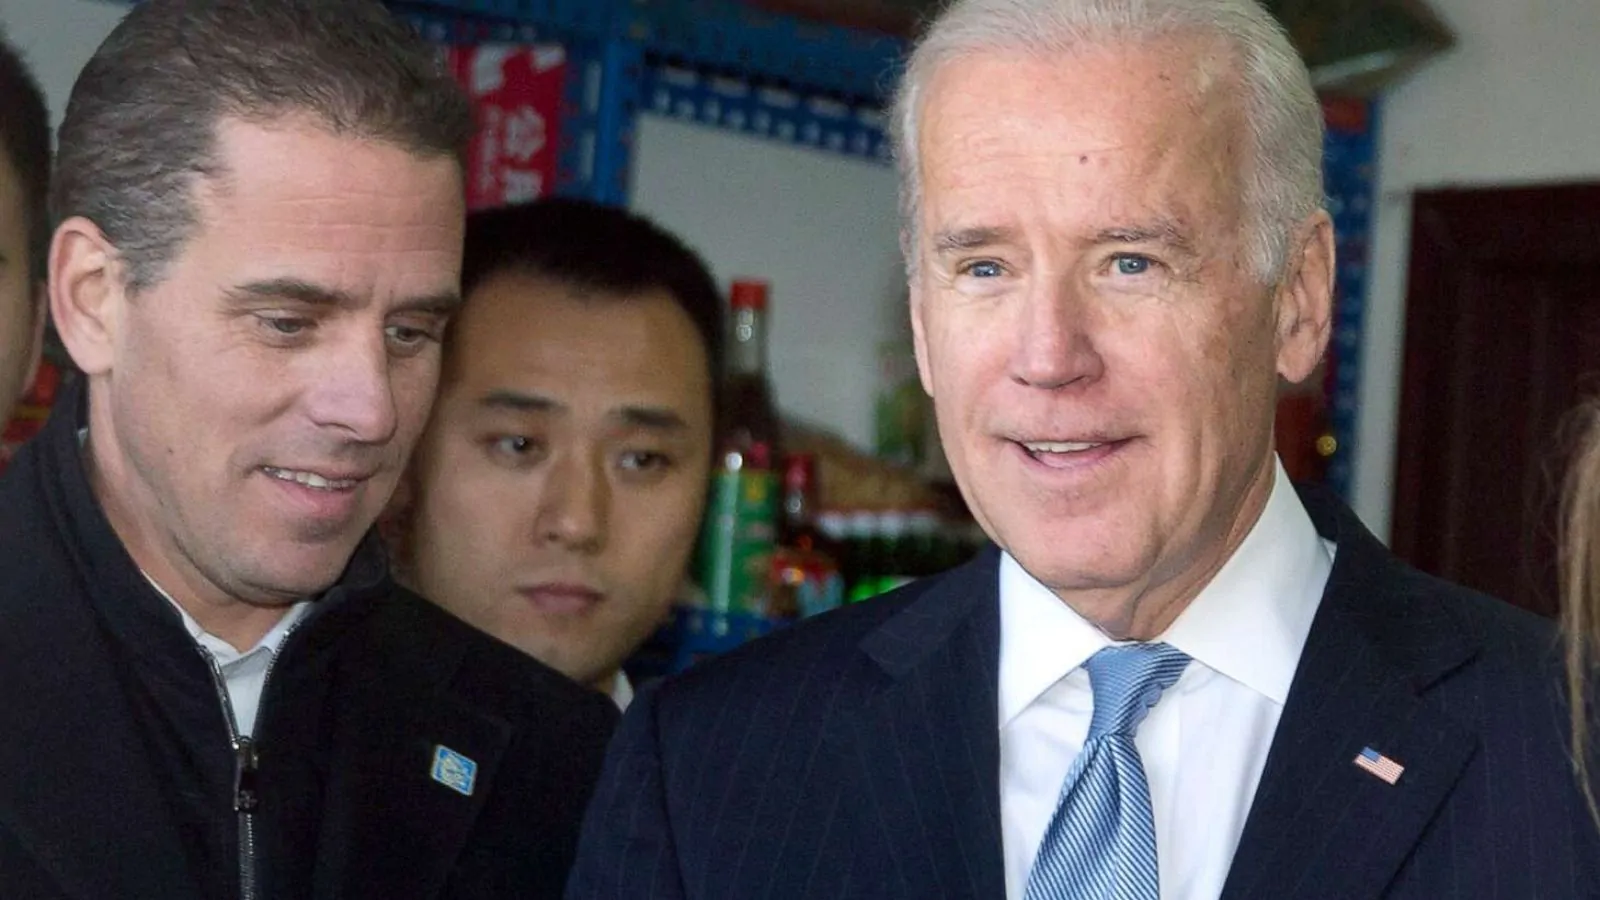 BREAKING: Biden Appears to Have Made a Decision About 2024 Election After Heart-to-Heart With Hunter